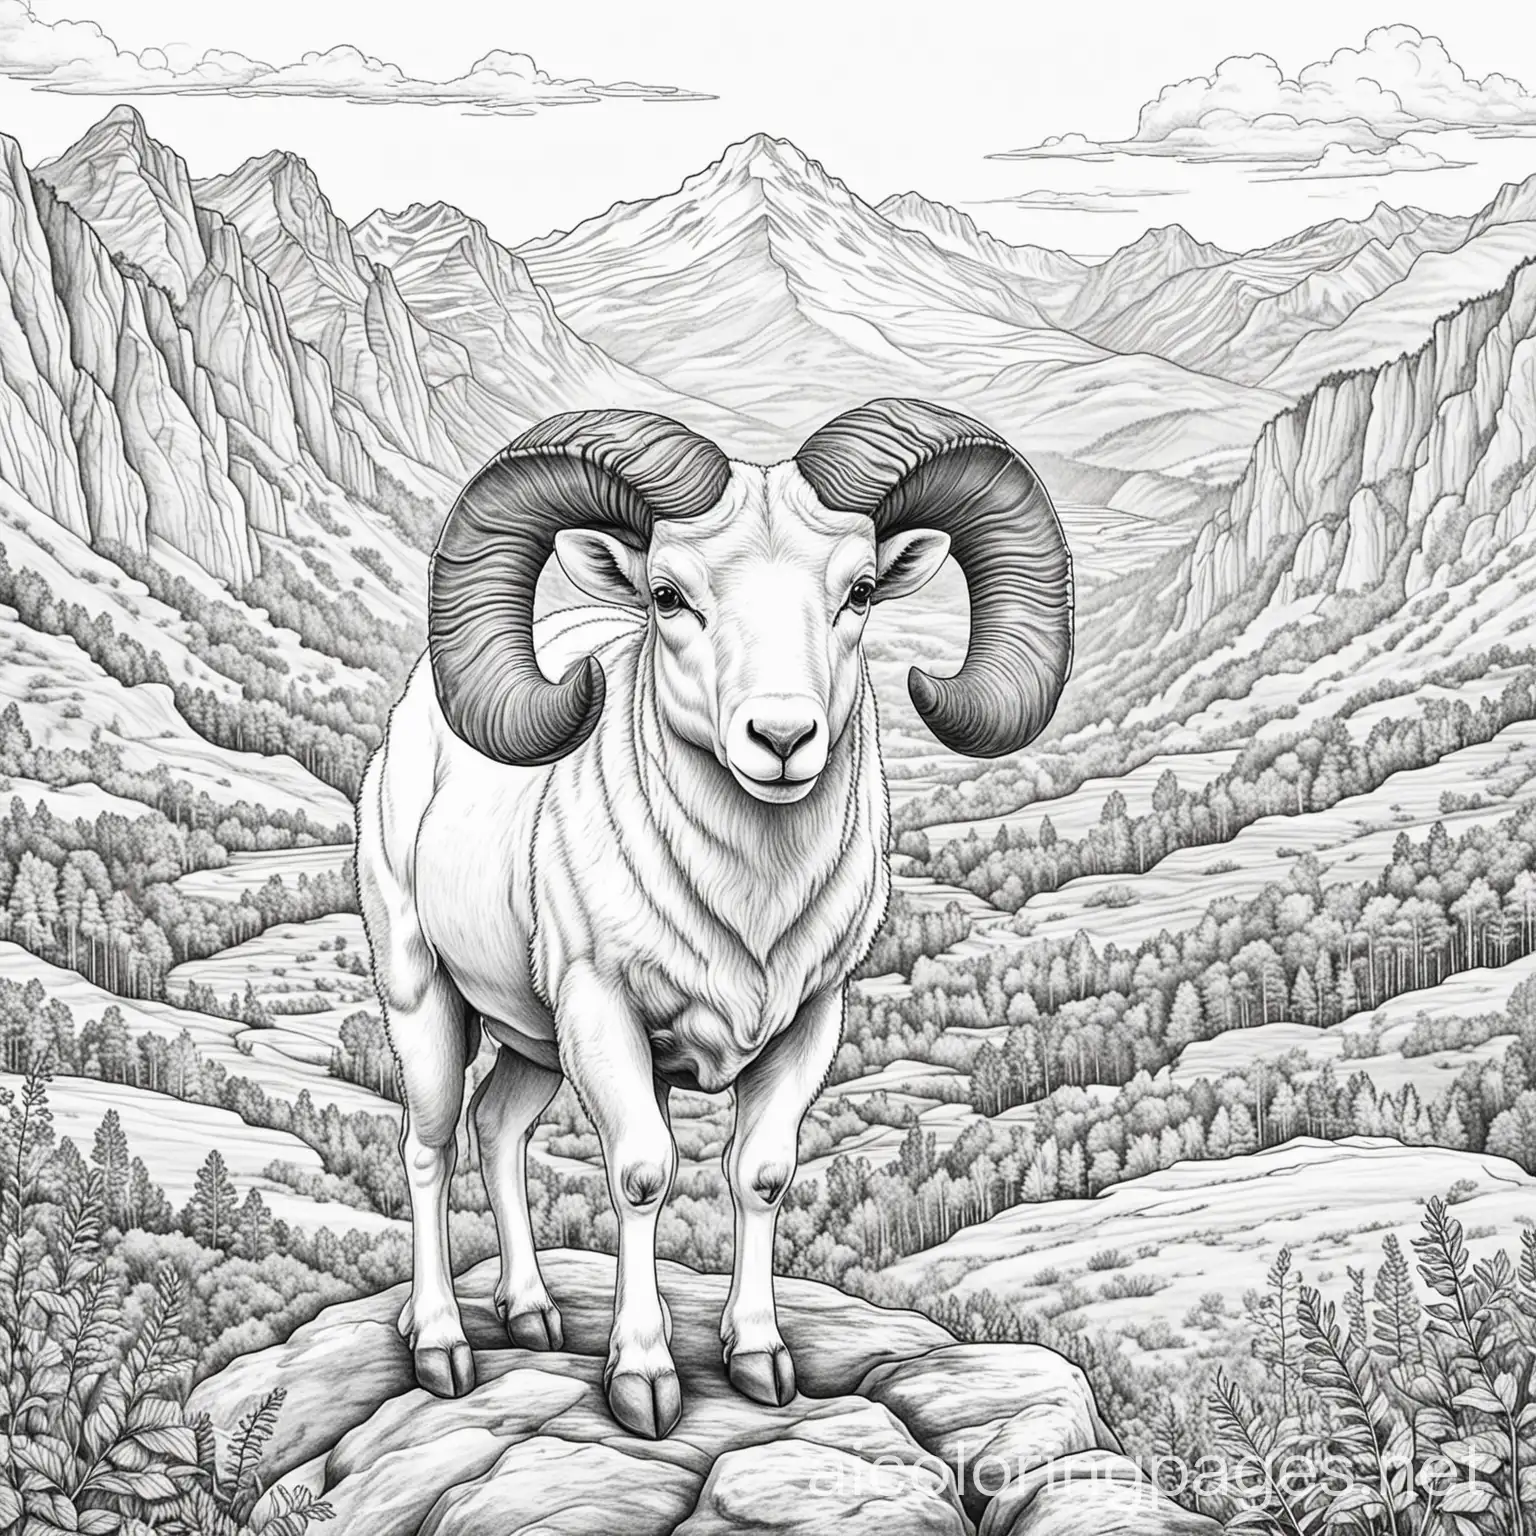 a ram black and white coloring page with a mountain background , Coloring Page, black and white, line art, white background, Simplicity, Ample White Space. The background of the coloring page is plain white to make it easy for young children to color within the lines. The outlines of all the subjects are easy to distinguish, making it simple for kids to color without too much difficulty